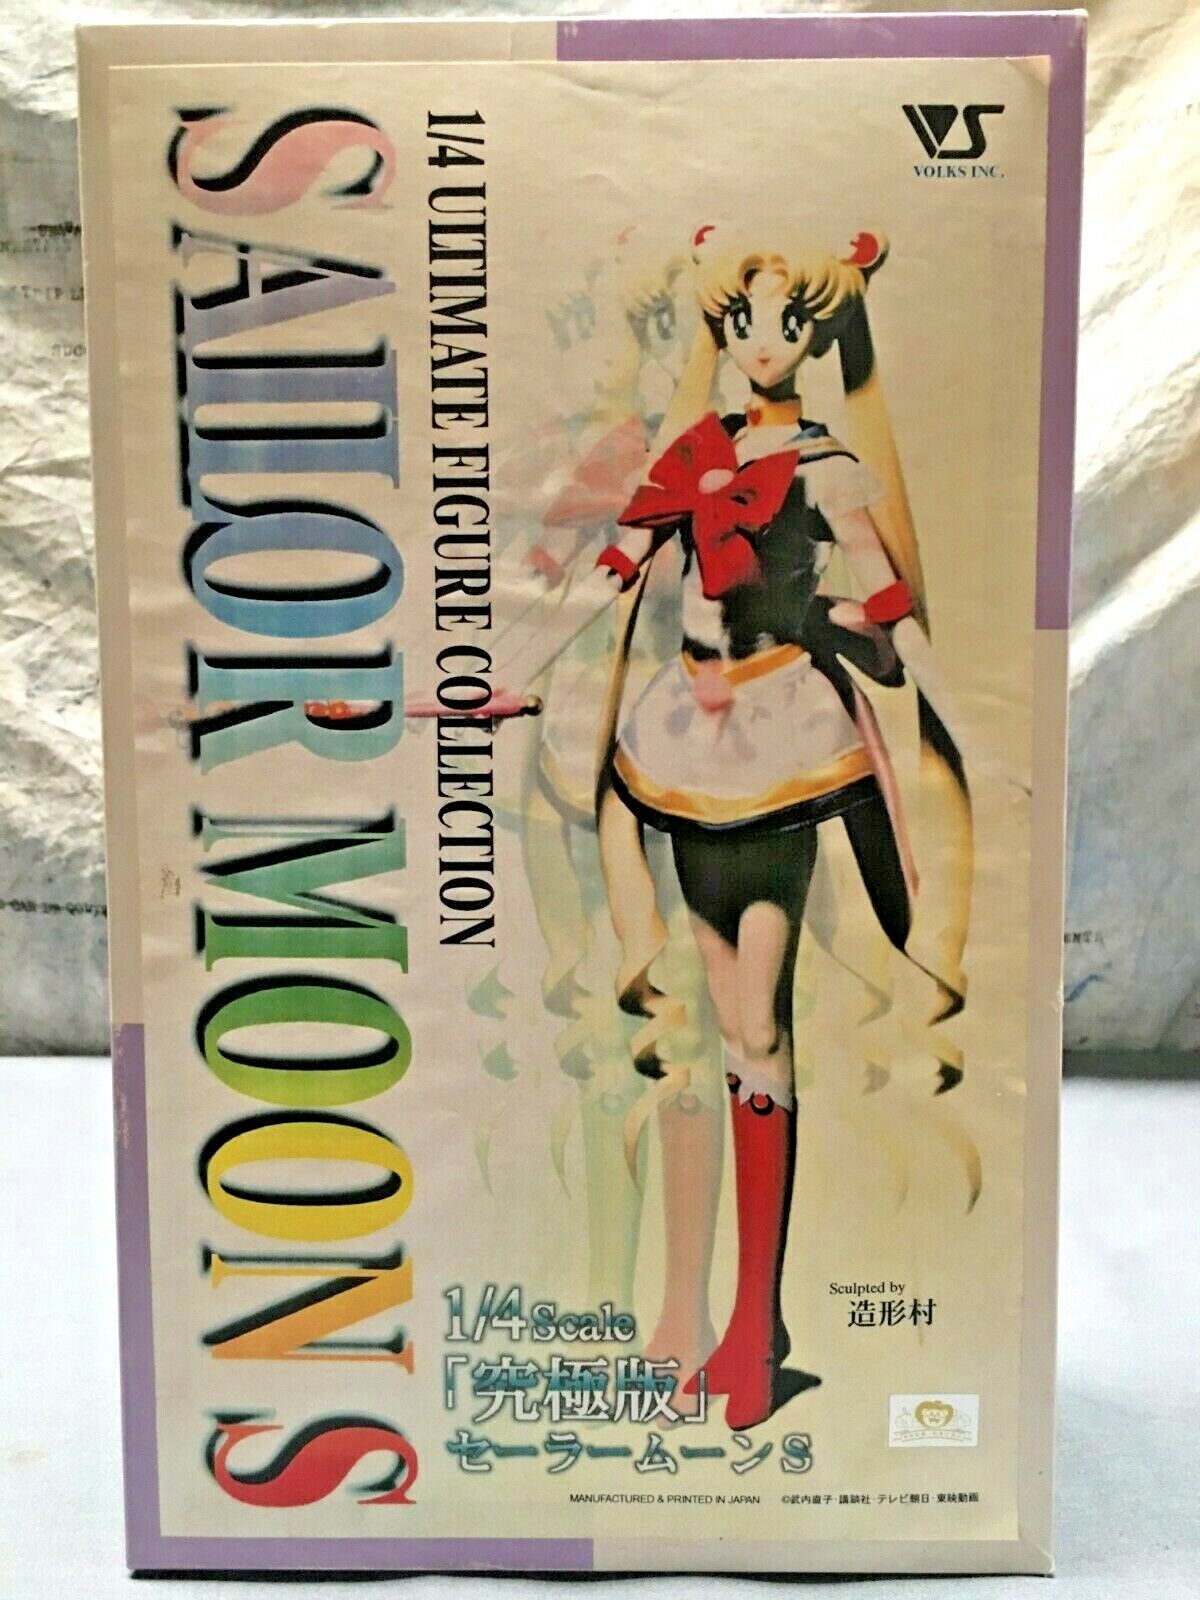 Volks Super Sailor Moon S Ultimate Figure Collection RARE 1/4 doll kit